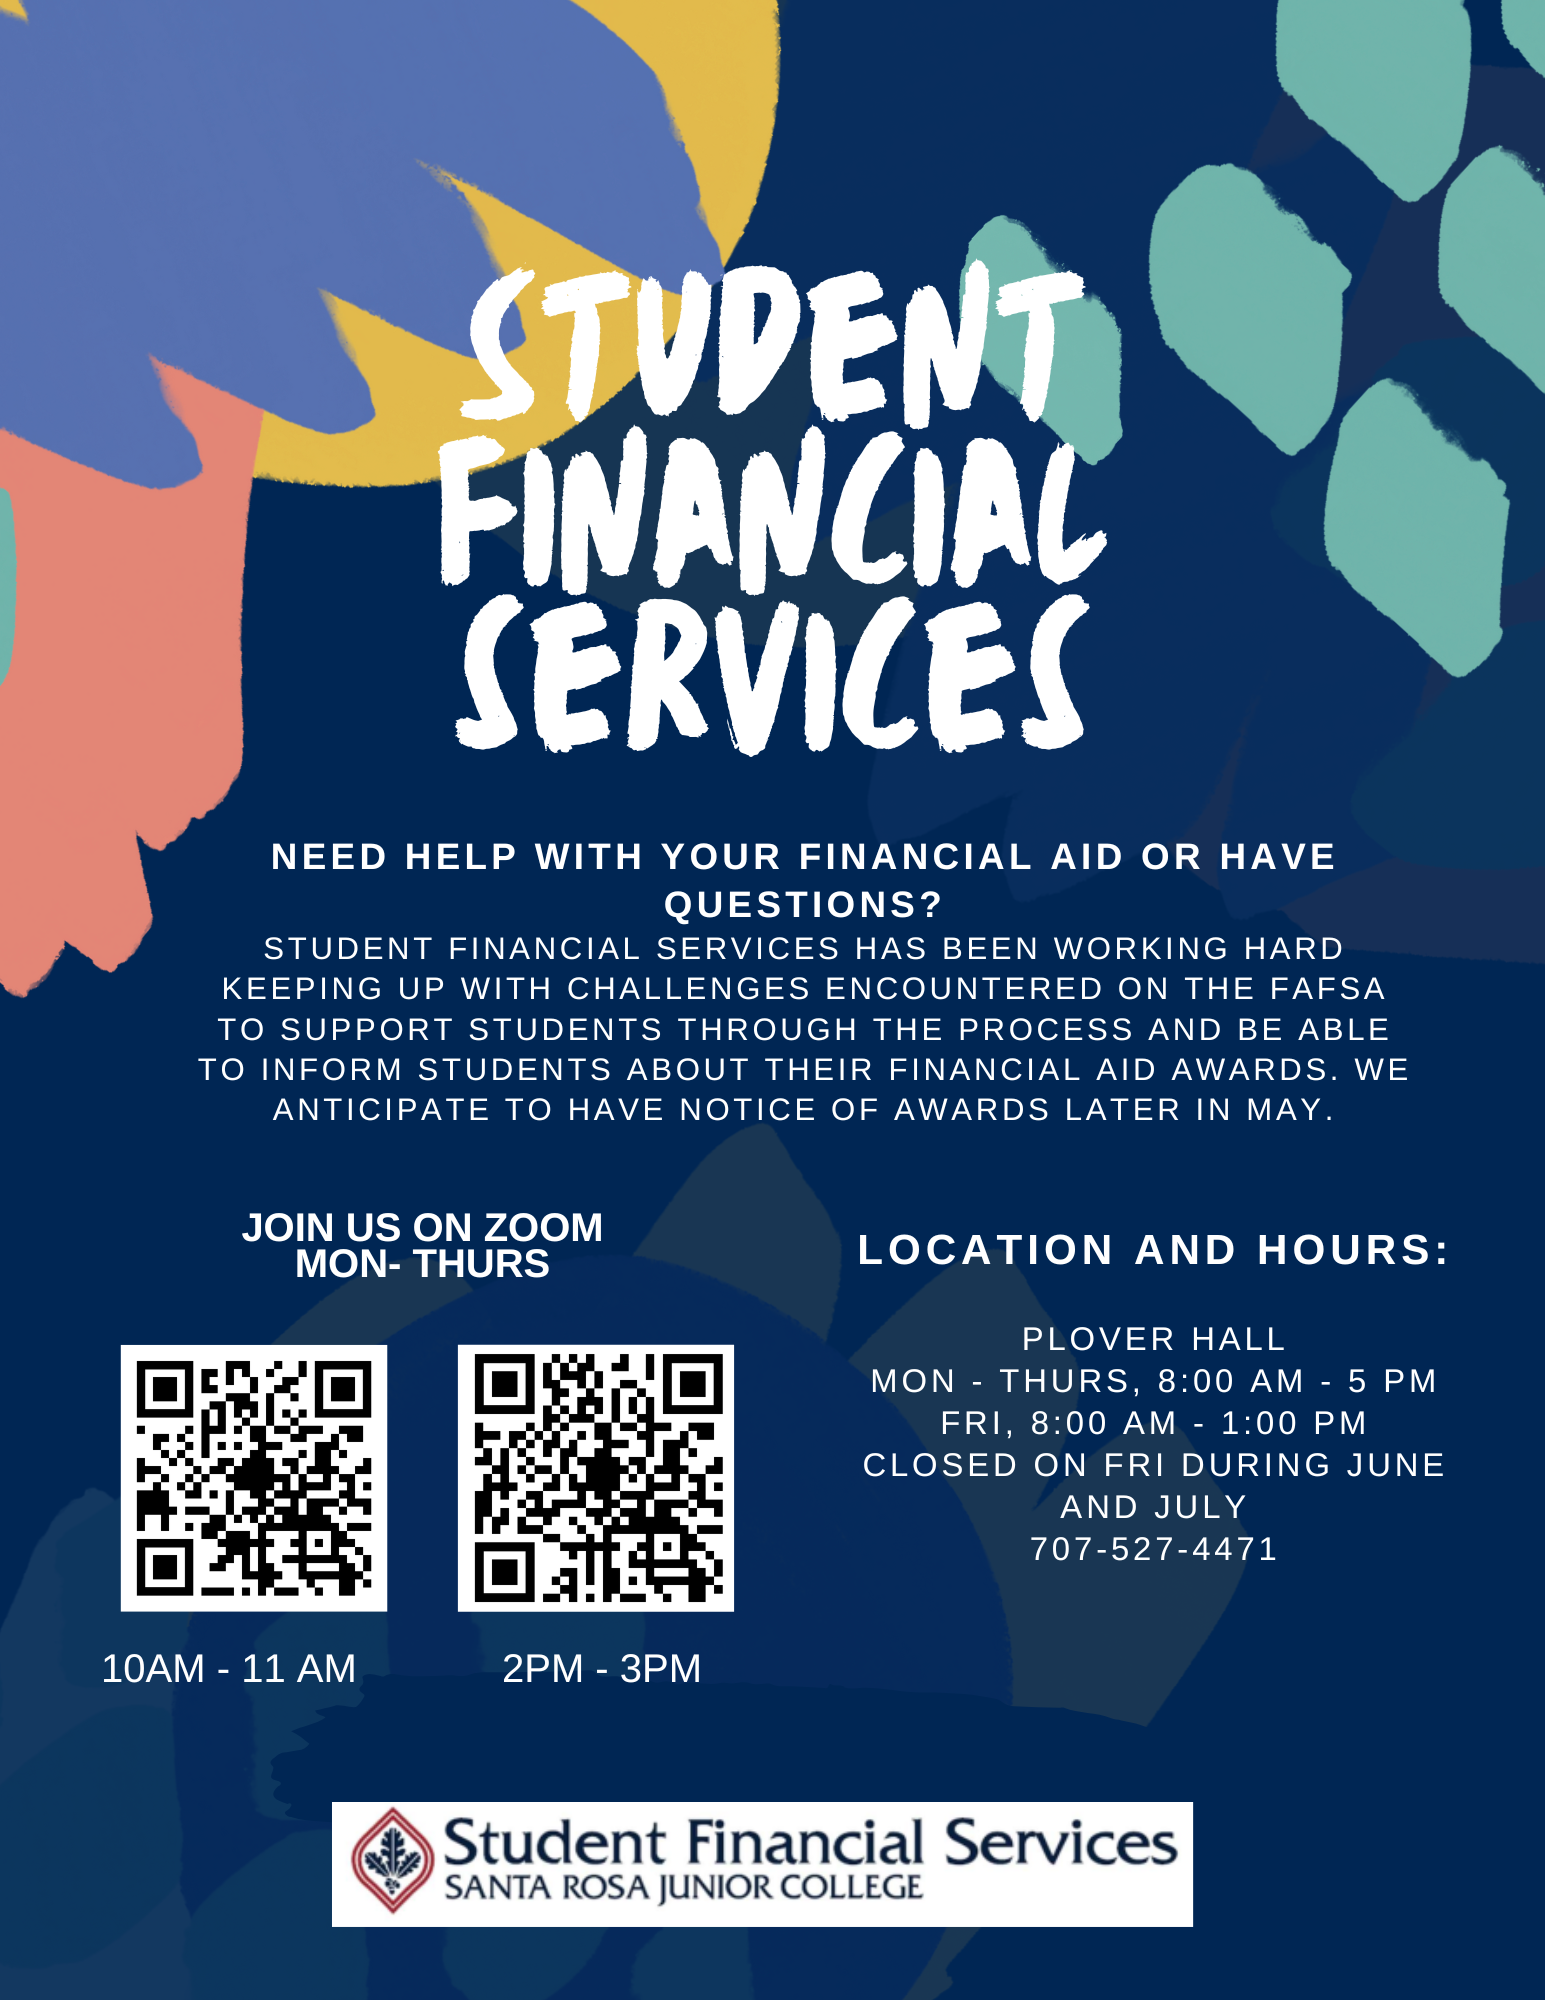 Student Financial Services. Need help with your financial aid or have questions? Student Financial Services has been working hard keeping up with challenges encountered on the FAFSA to support students through the process and be able to inform students about their financial aid awards we anticipate to have notice of awards in May. Location and hours: Plover Hall MON-THU 8am-5pm, FRI 8am-1pm. Closed on FRI during June and July 707-527-4471. Join on Zoom Mon-Thu